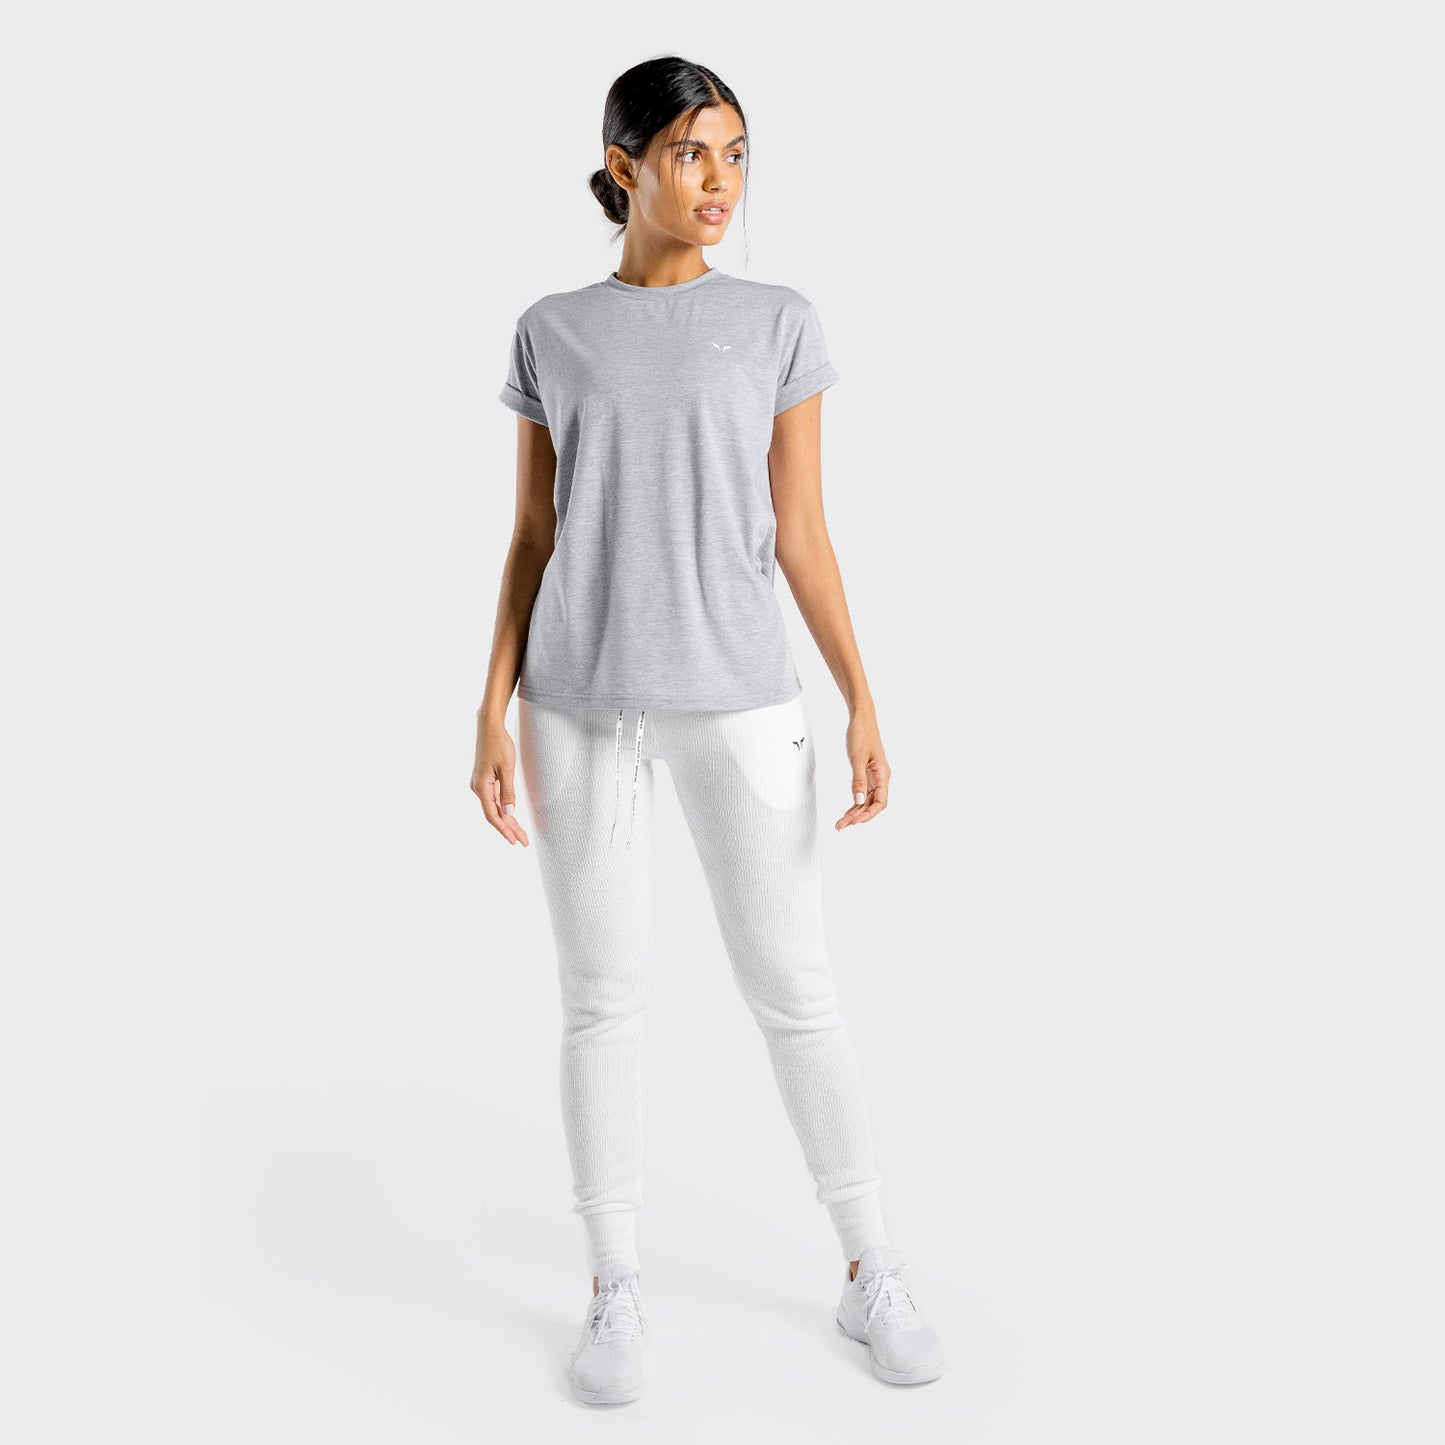 squatwolf-gym-t-shirts-for-women-luxe-oversize-tee-marl-workout-clothes